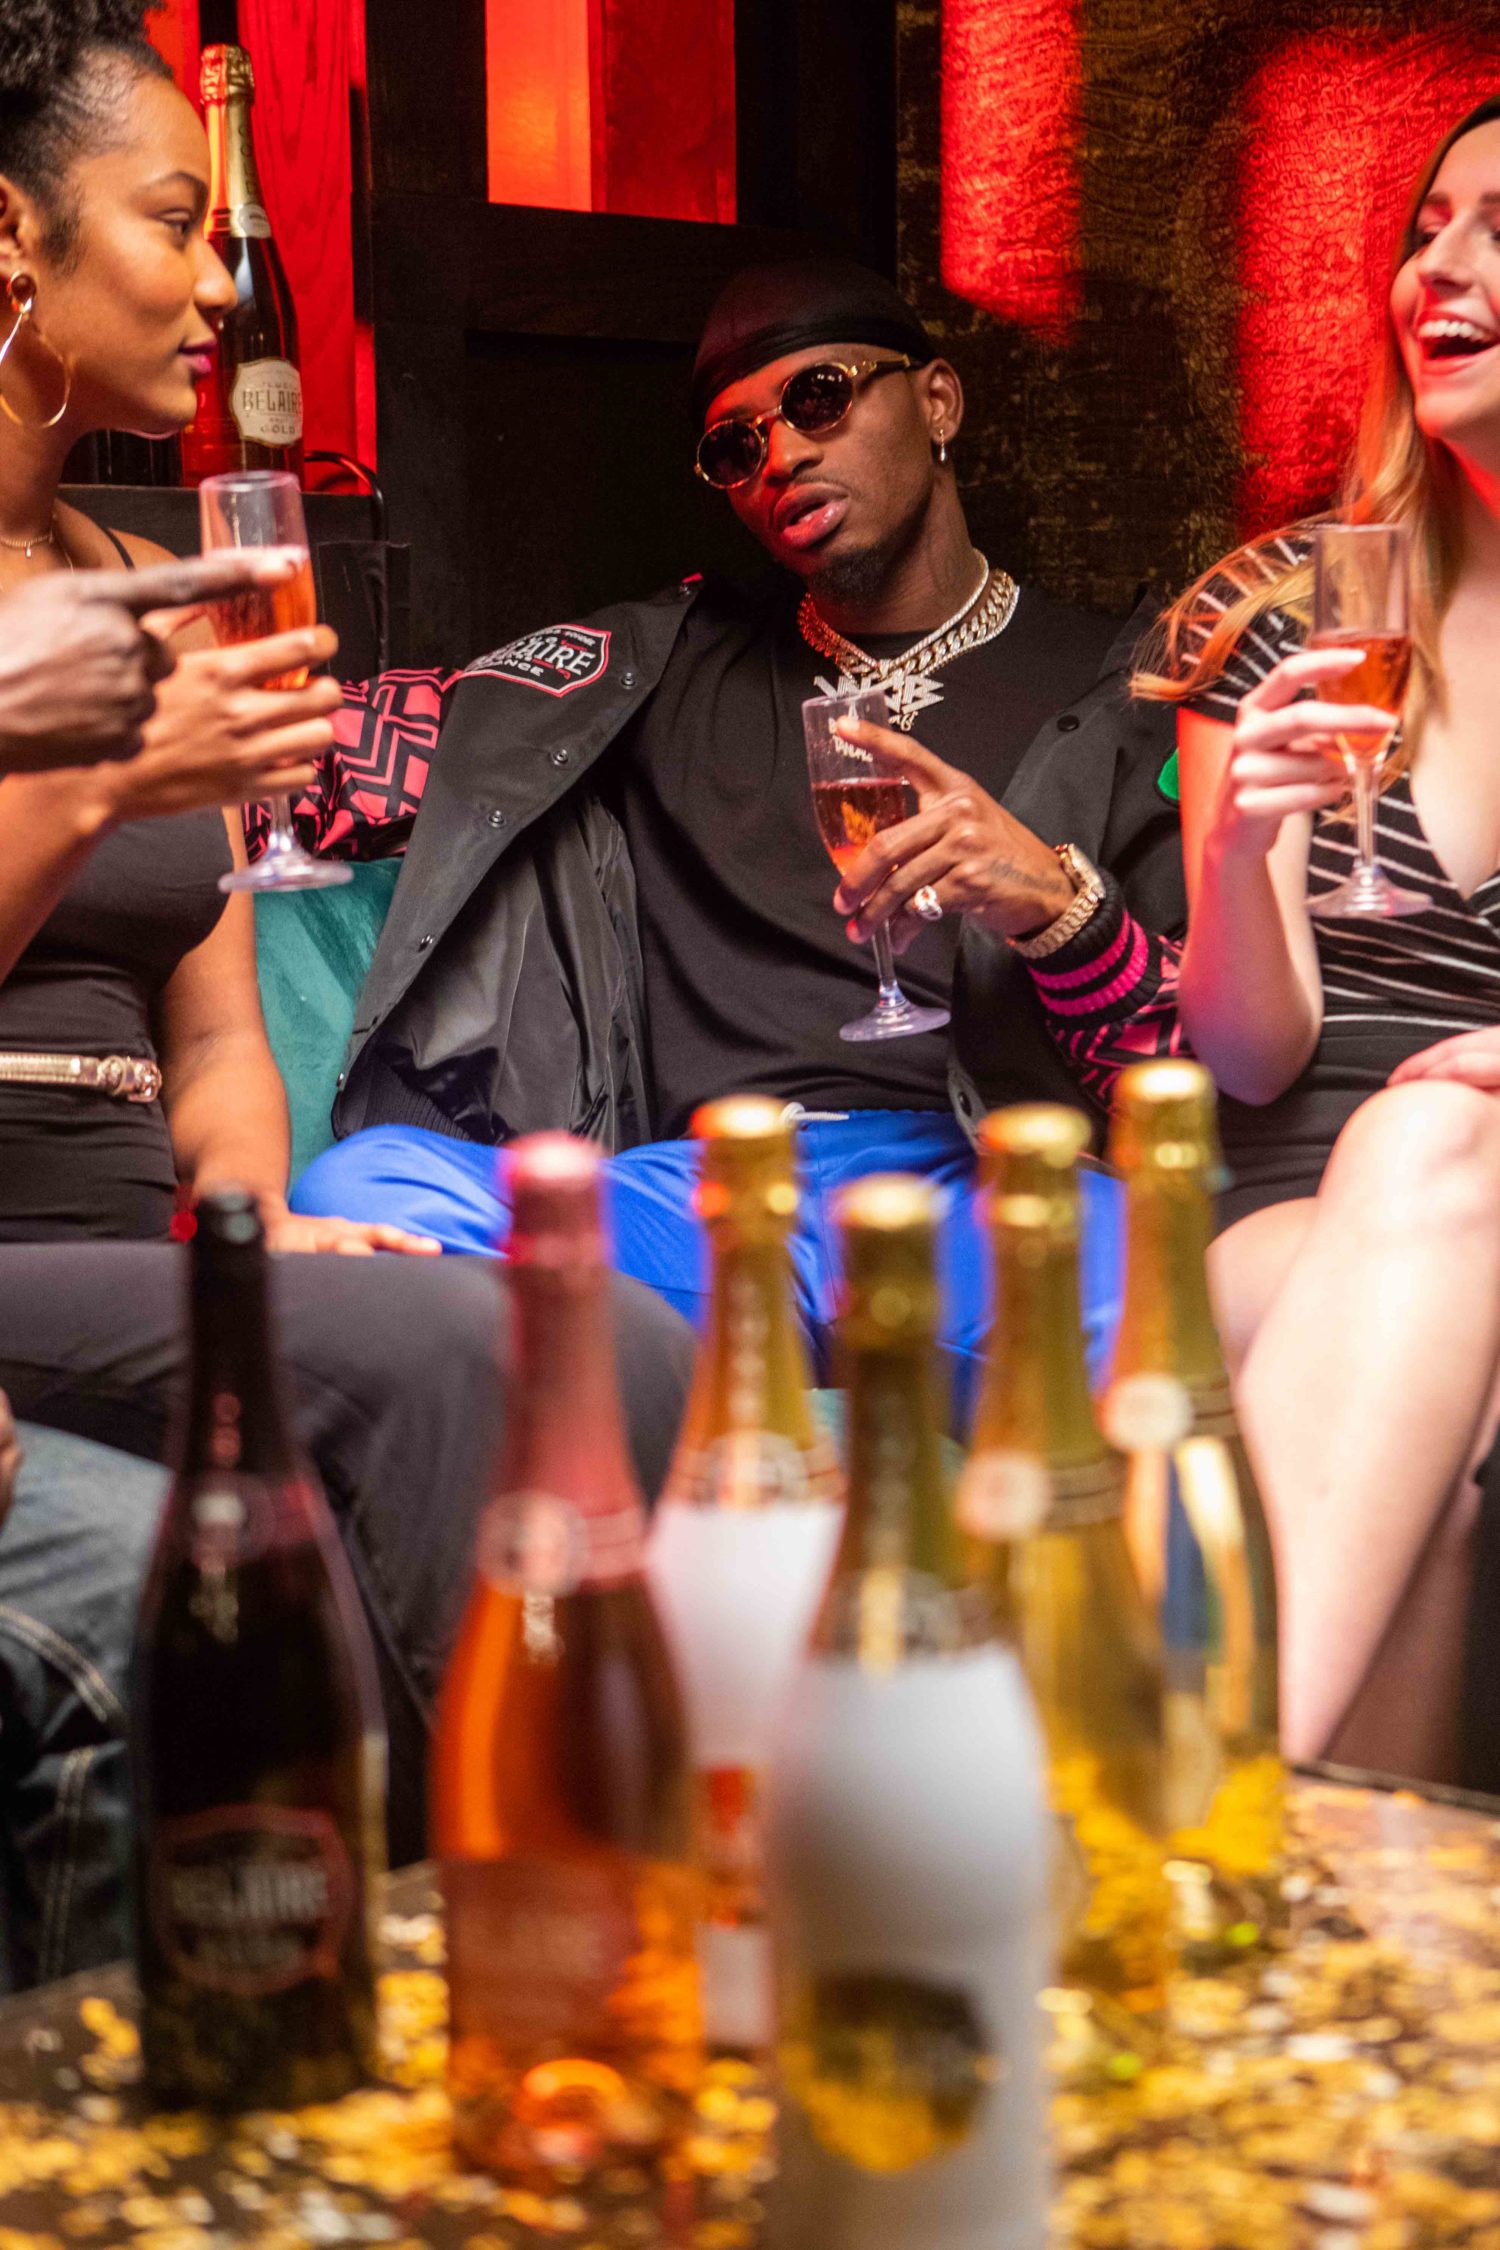 Exclusive: Behind the Scenes with Diamond Platnumz and Belaire